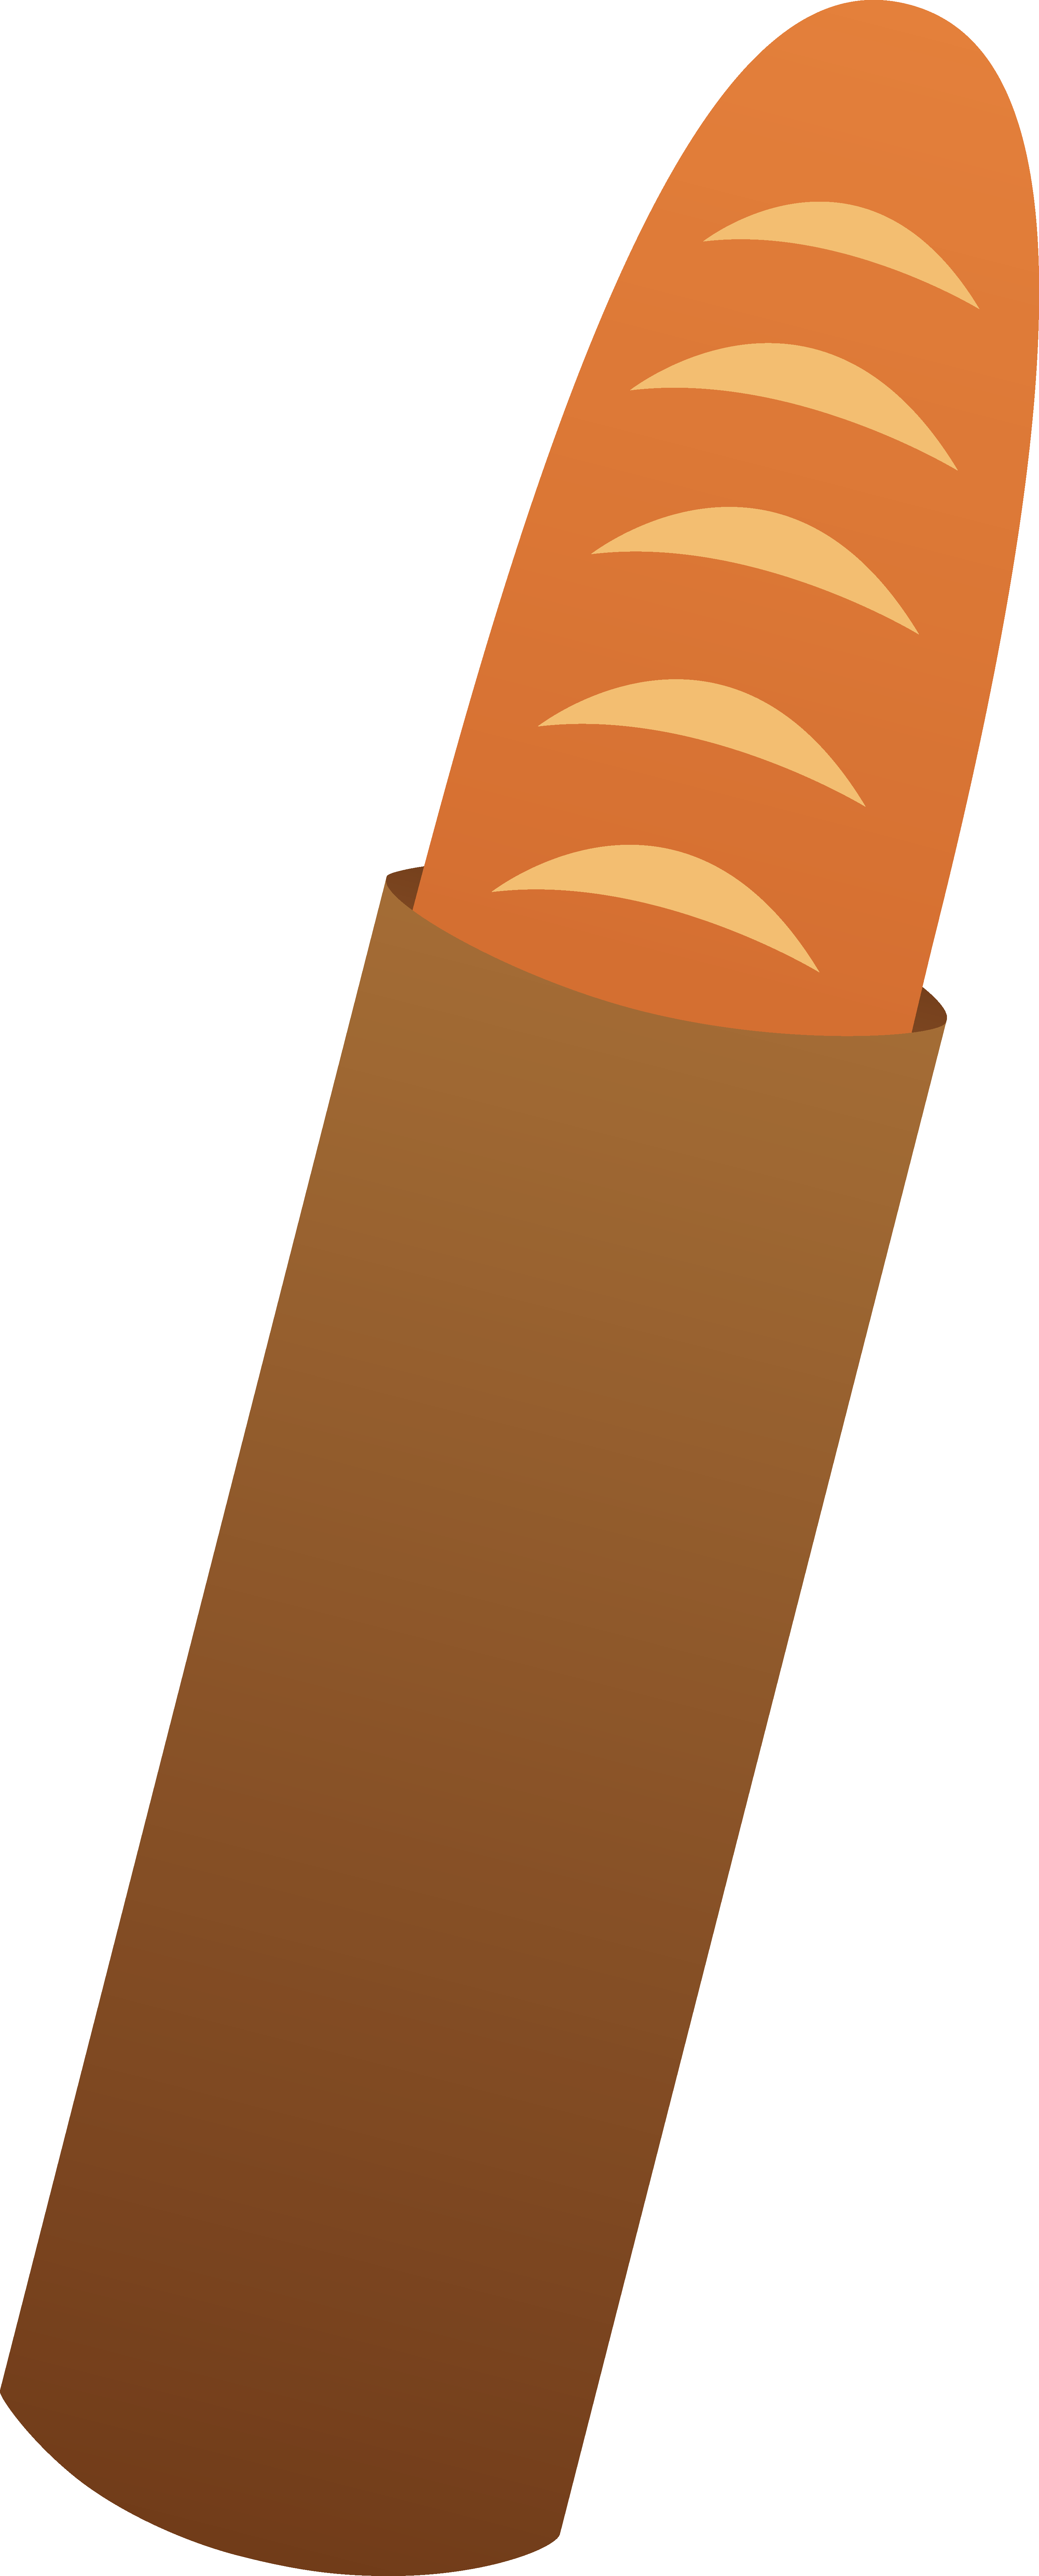 Peaches clipart animated. Baguette bread loaf in